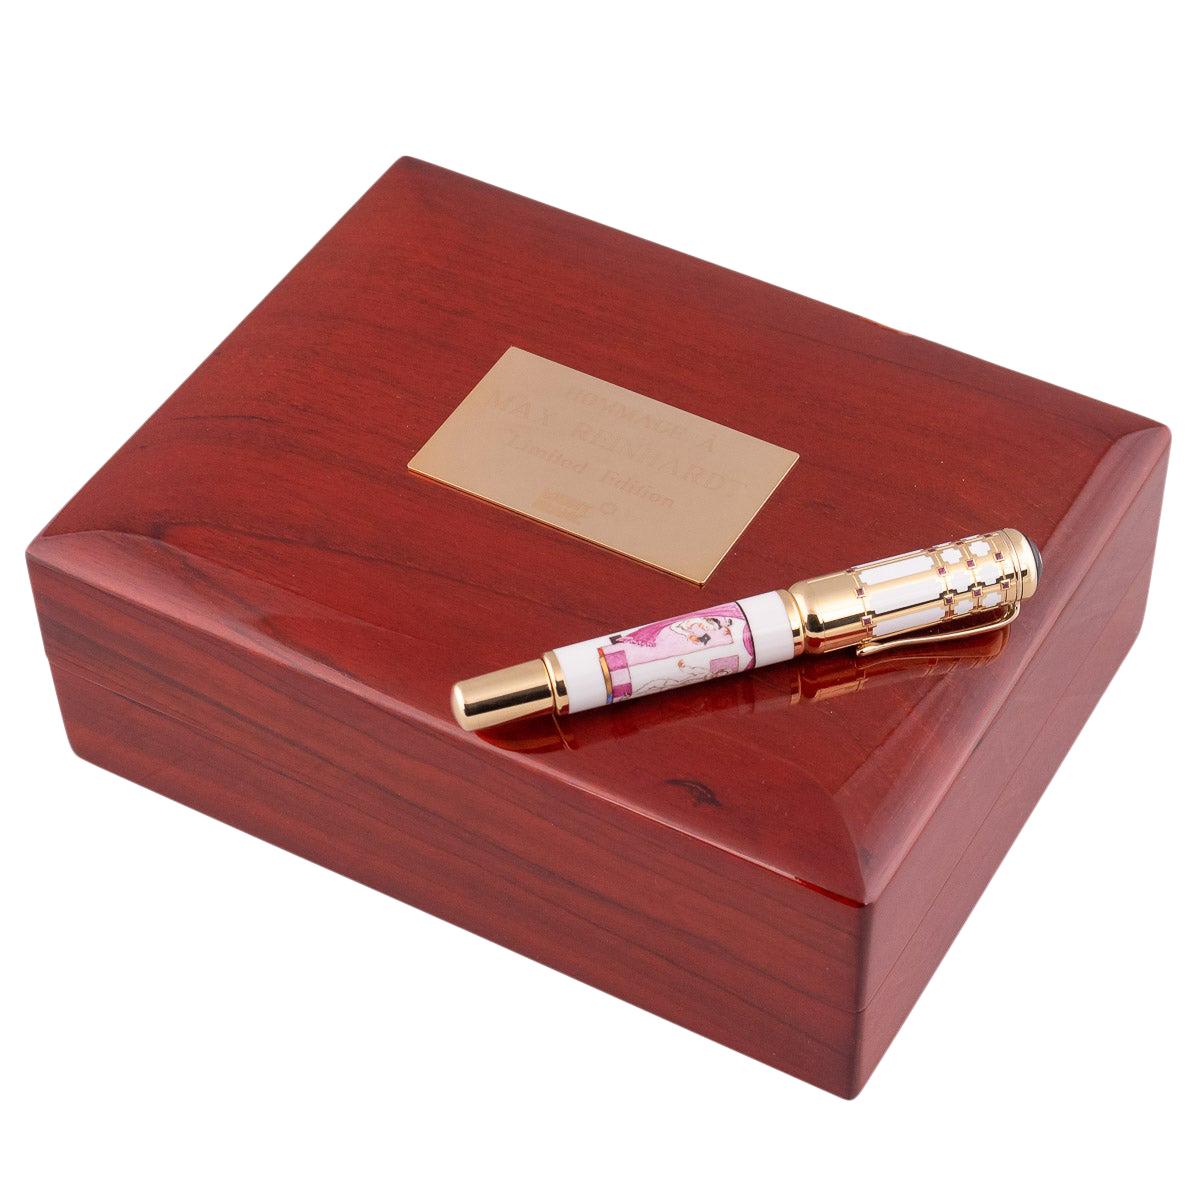 Montblanc 5/10 Limited Edition Max Reinhardt Ruby Fountain Pen, 2003